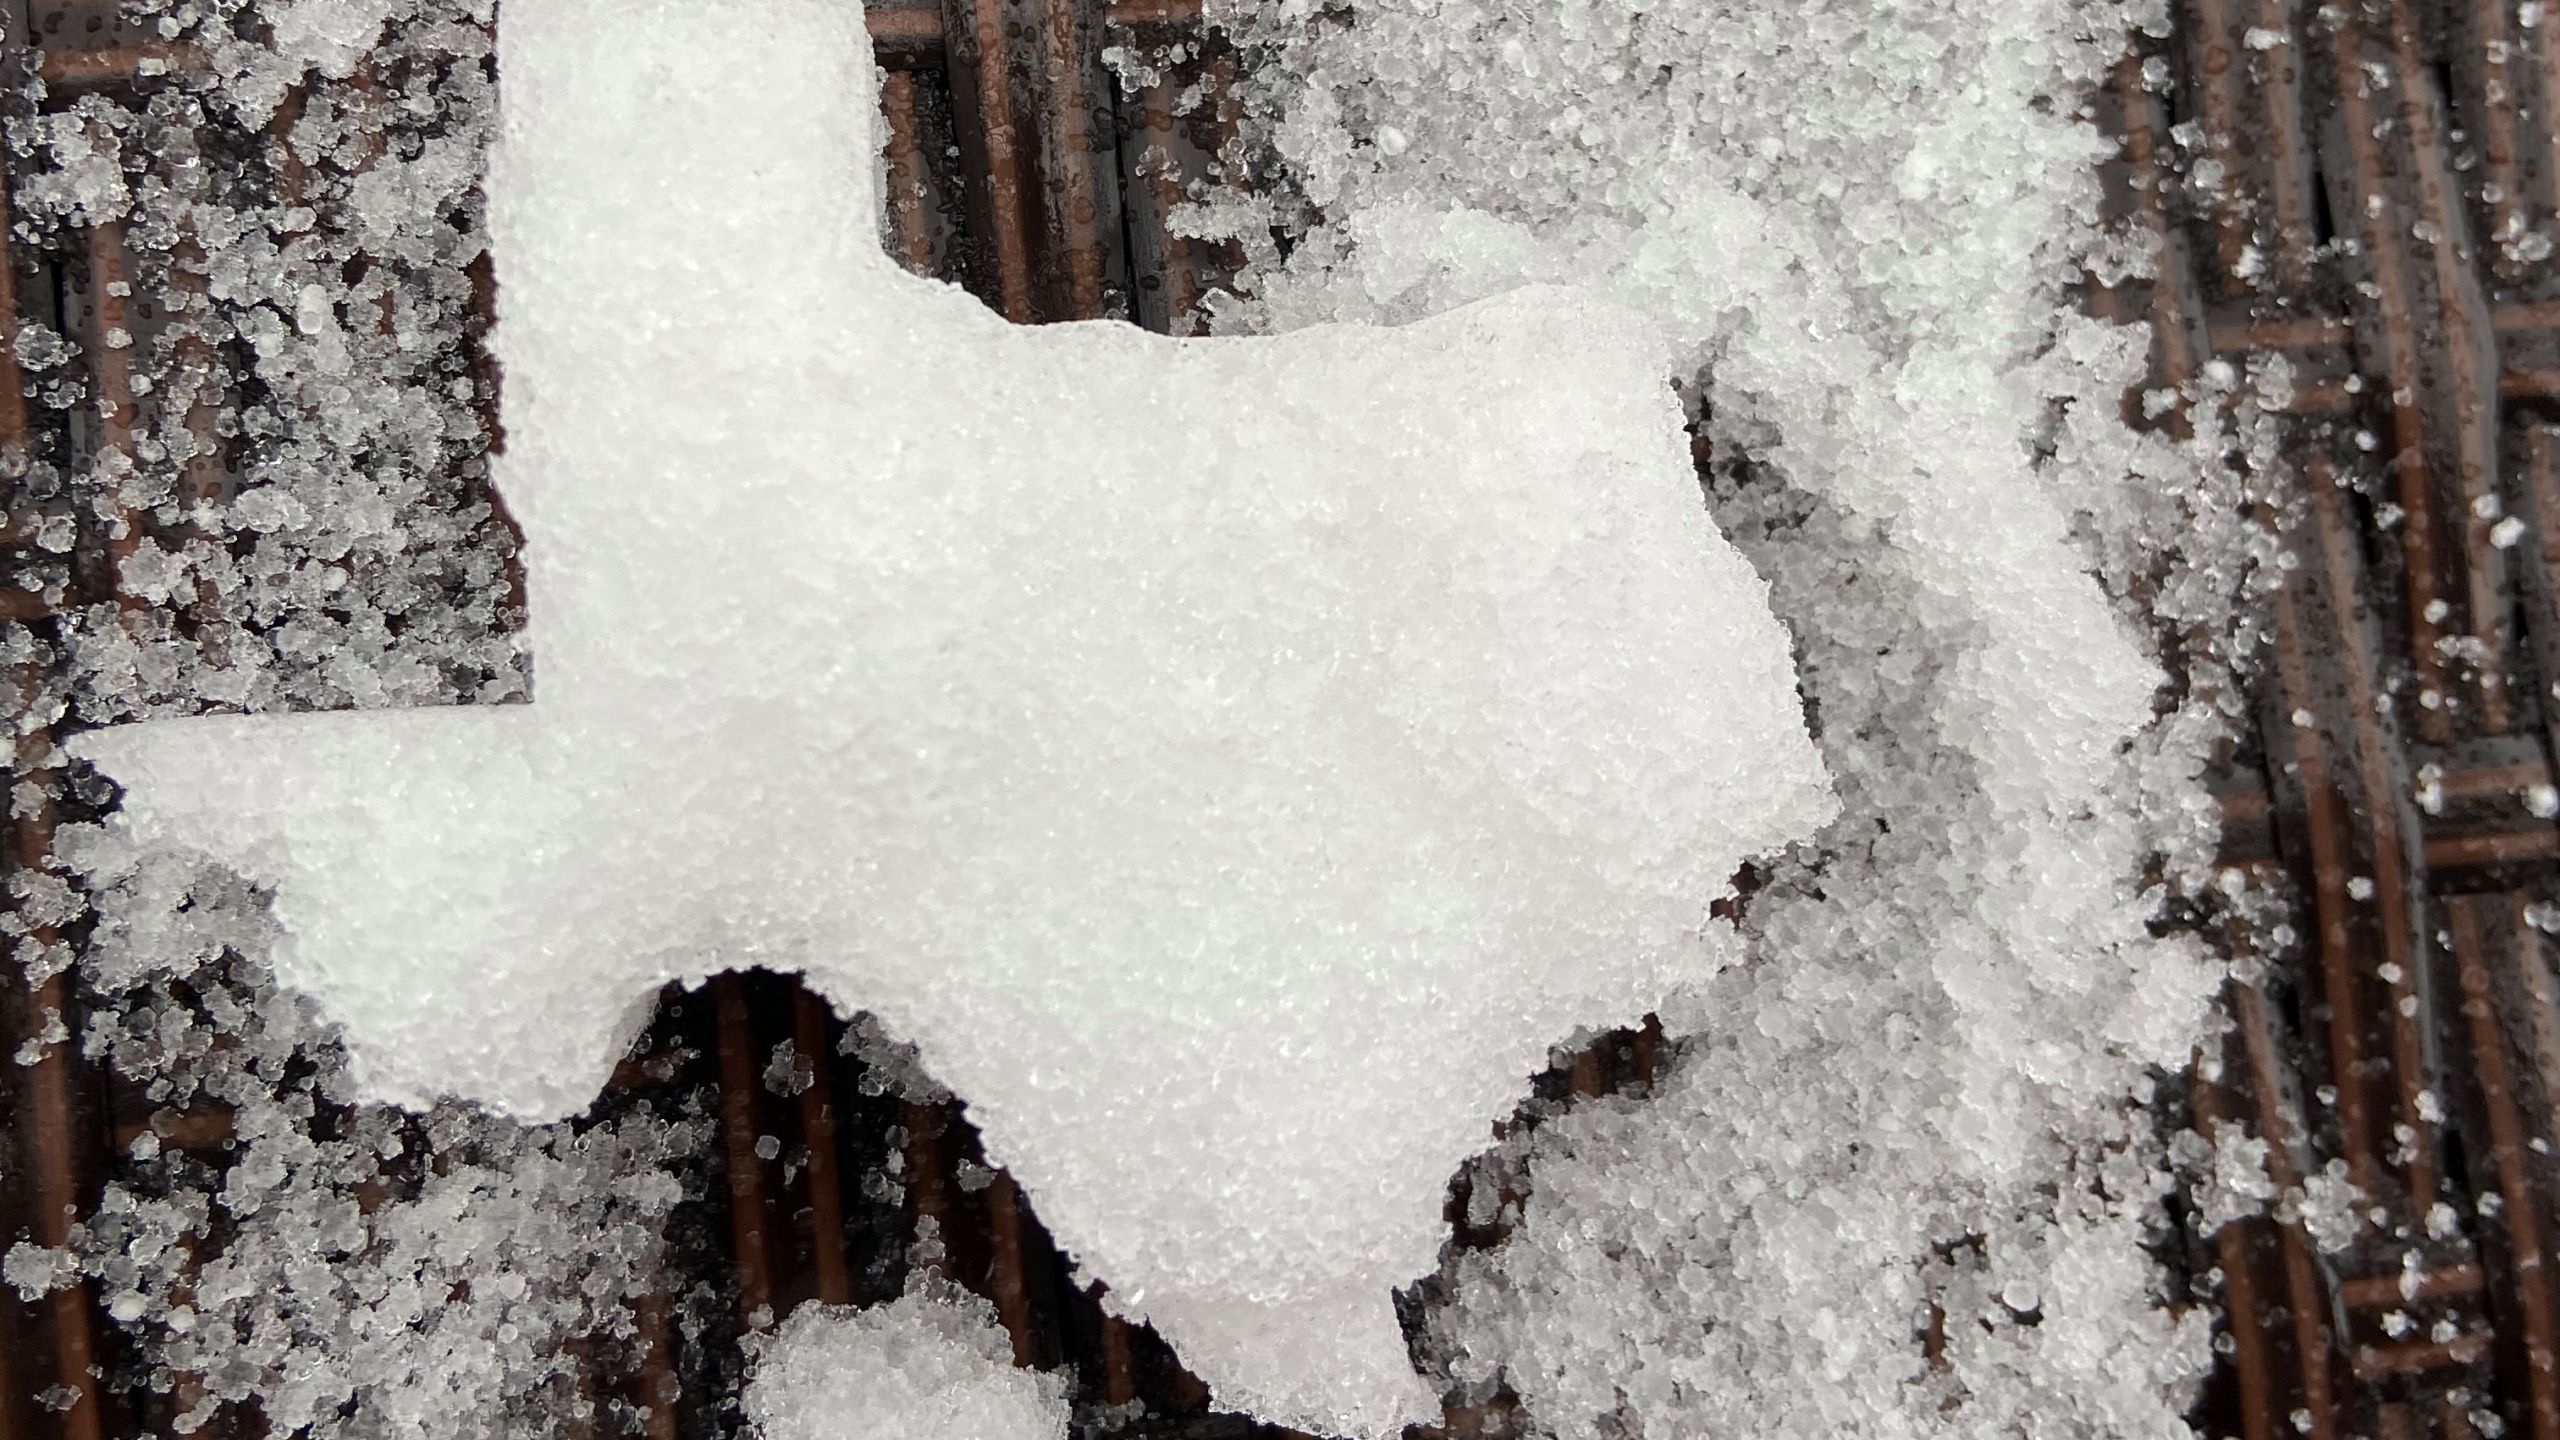 GALLERY: Central Texas turns into Winter Wonderland as Sunday storm moves through. KRQE News 13